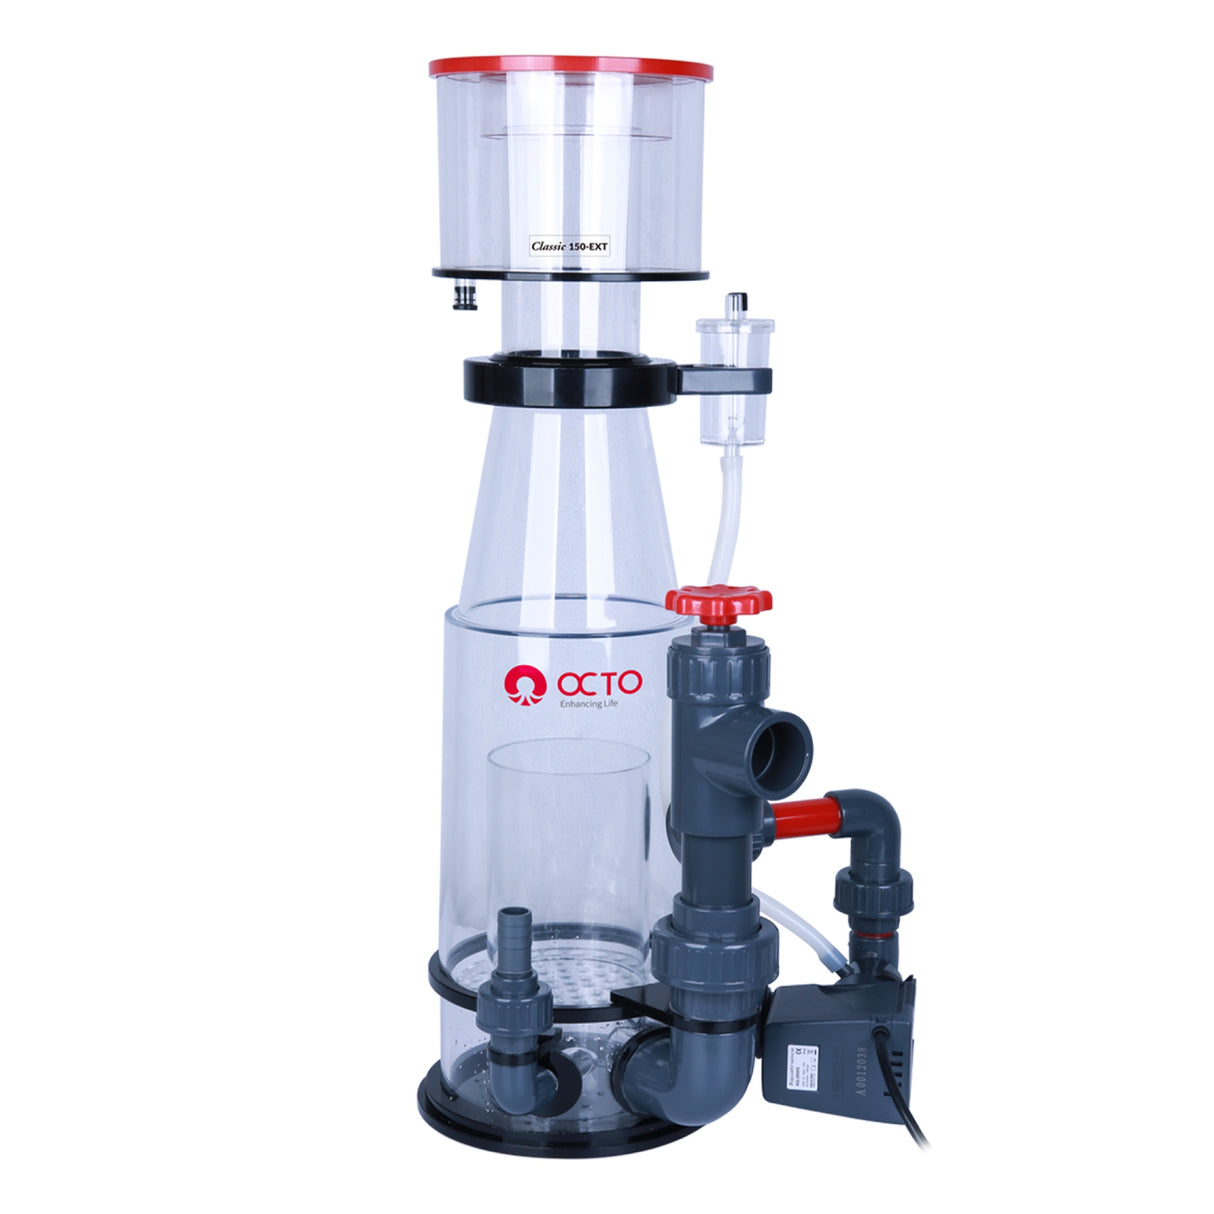 Classic 150-EXT Protein Skimmer